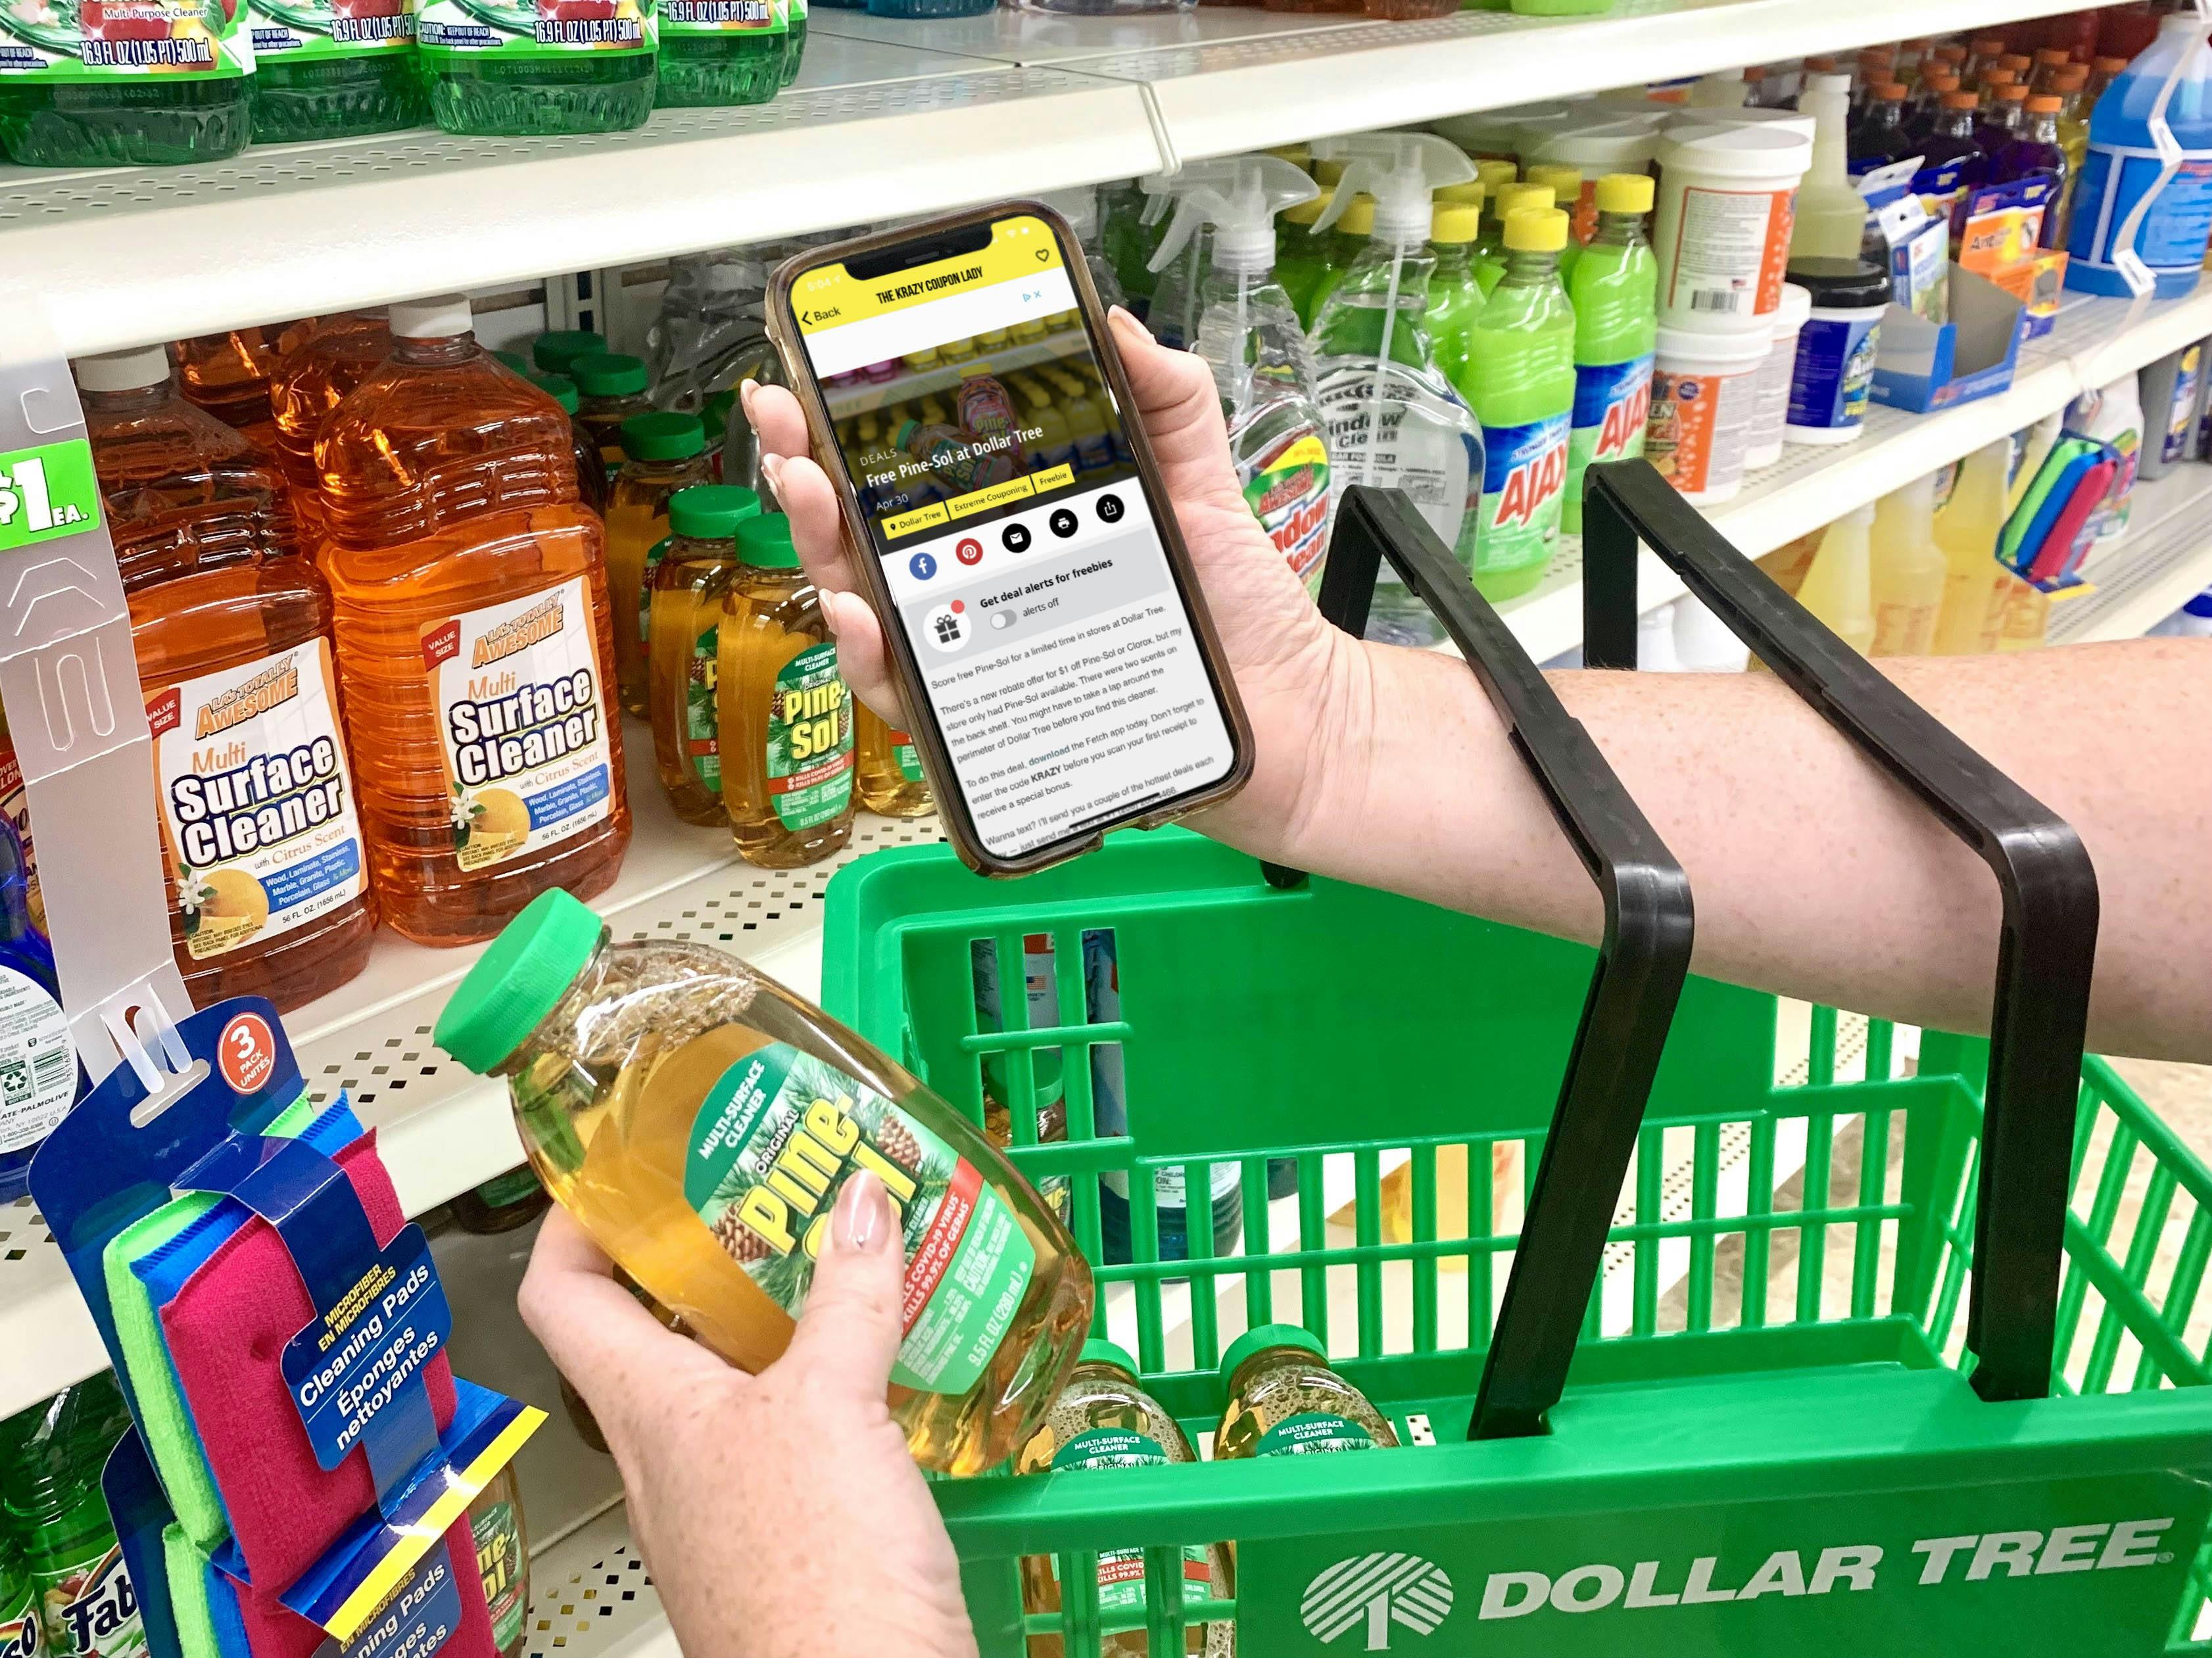 hand holding dollar tree basket with phone and pine sol